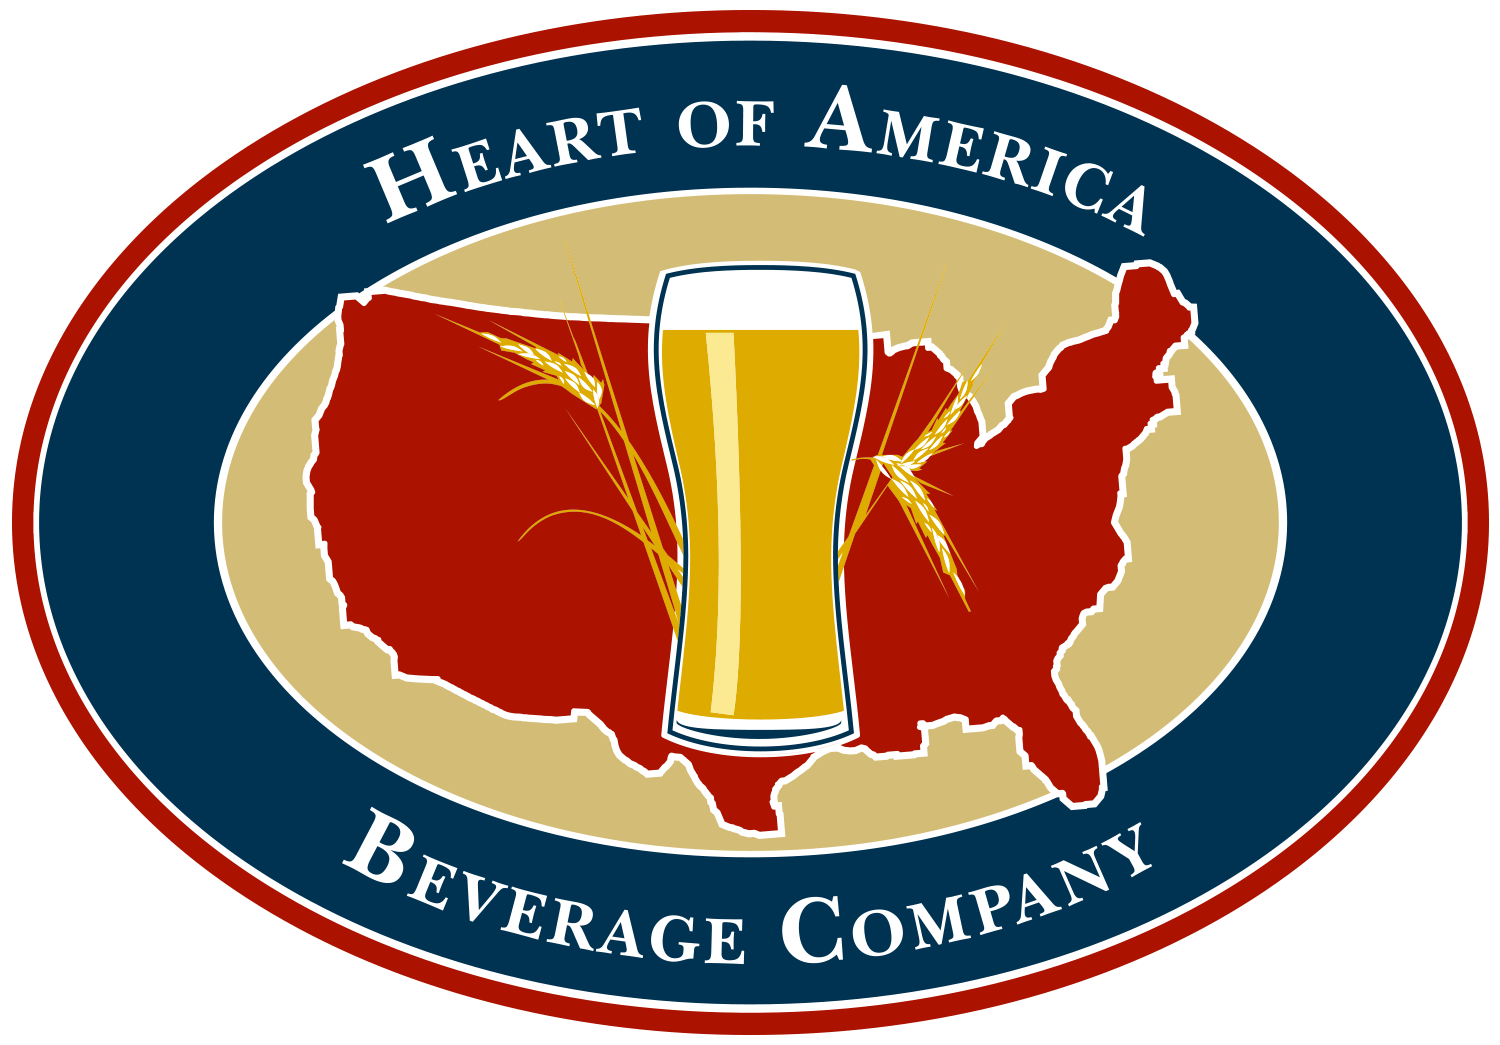 Red and Yellow Beverage Logo - Heart of America Beverage